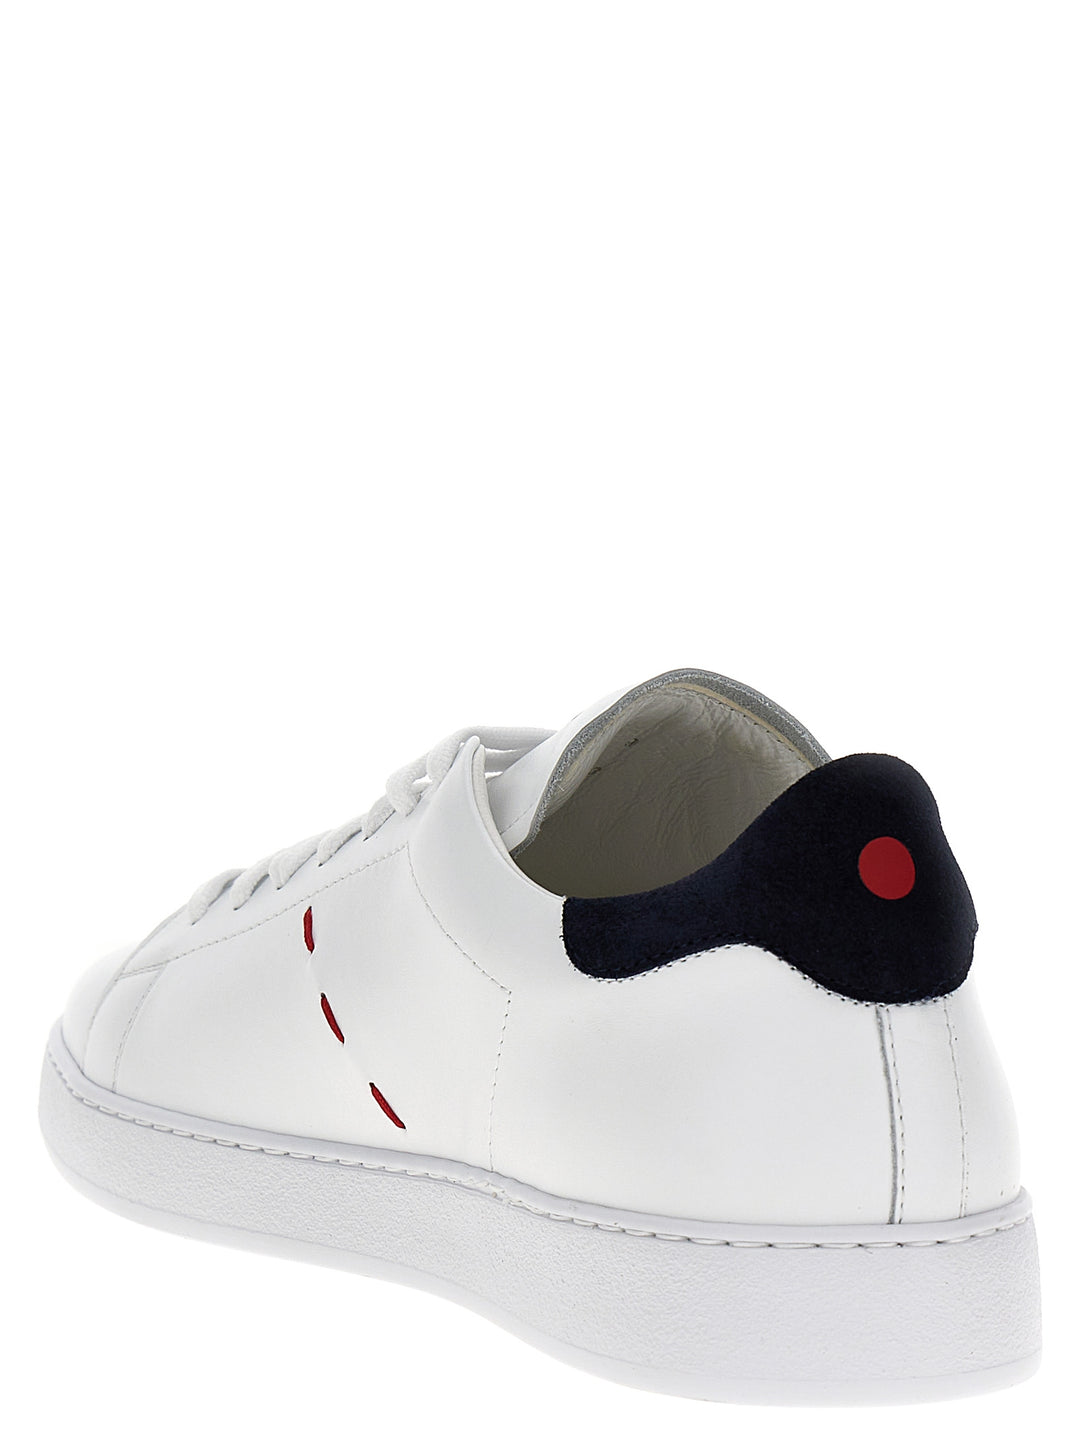 Low Sneakers Bianco